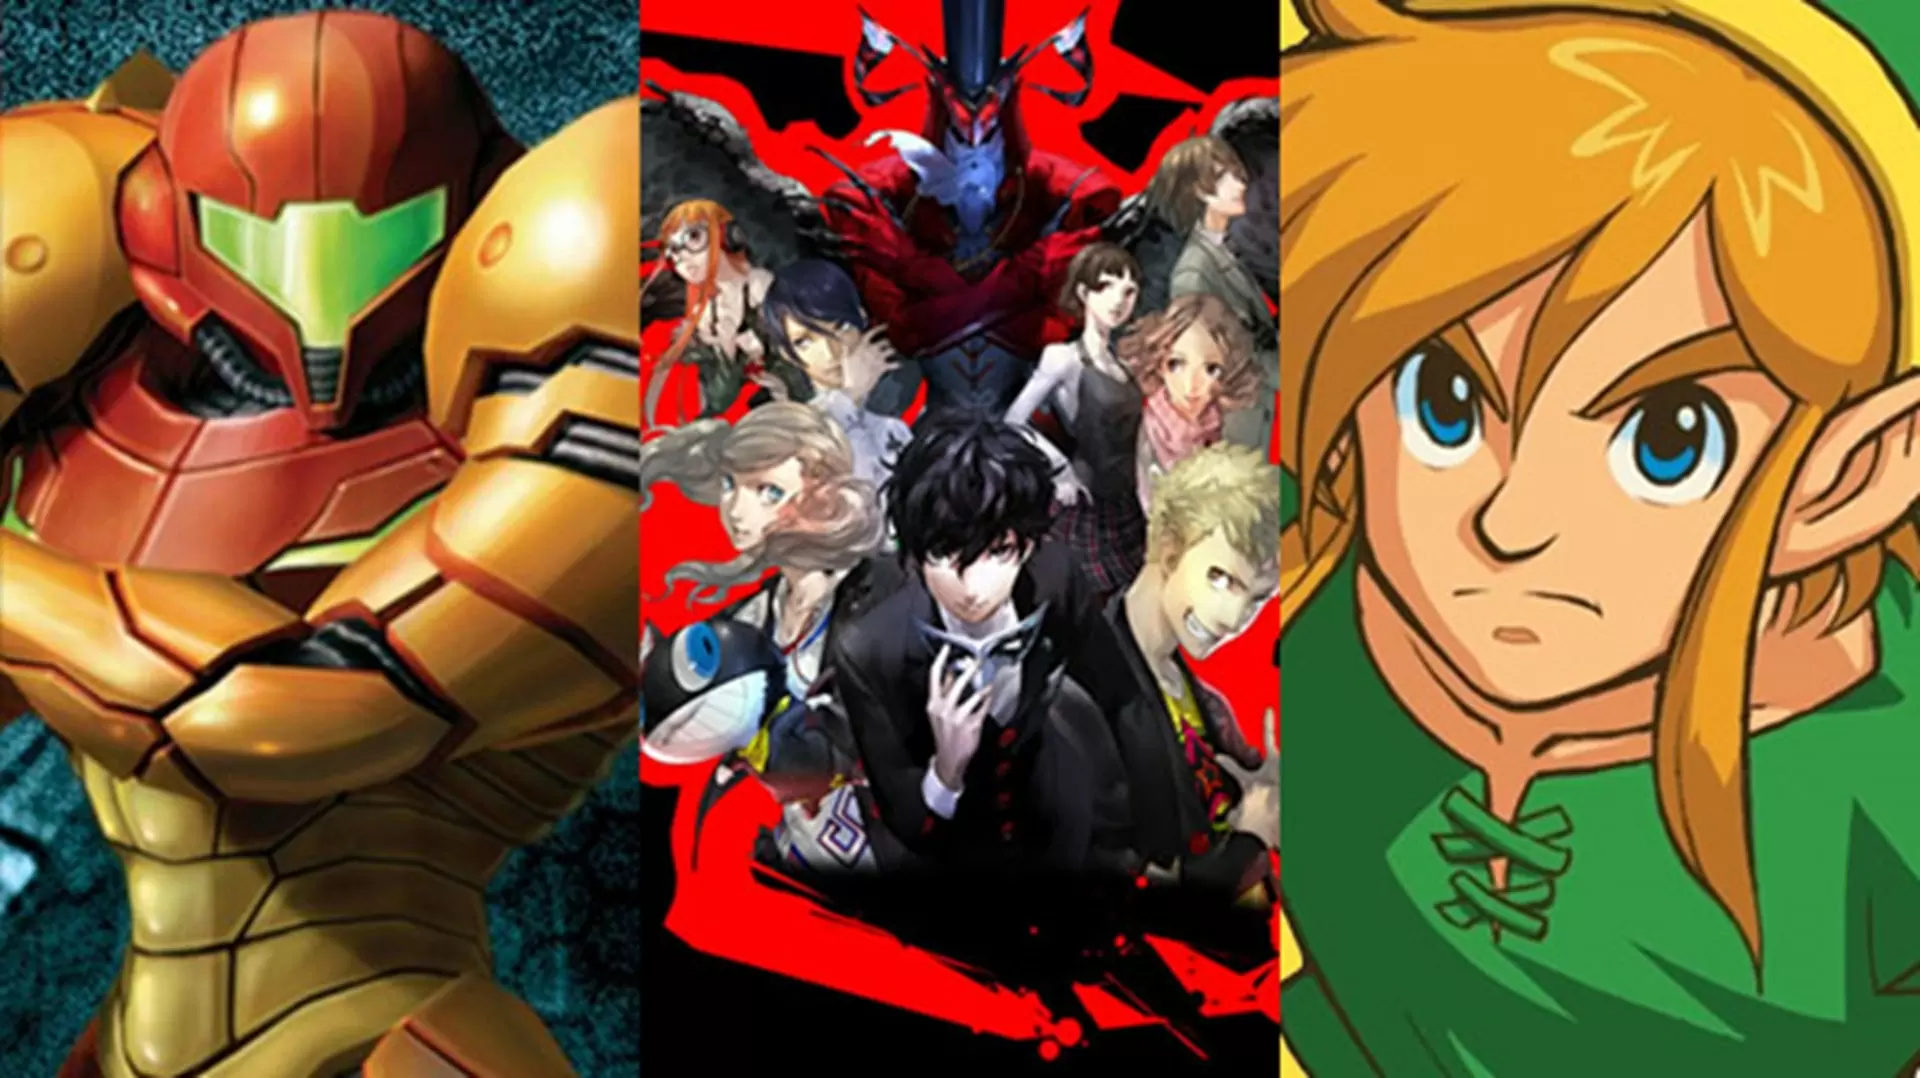 The Legend of Zelda: A Link to the Past, Metroid Prime Trilogy, e Persona 5 in arrivo su Nintendo Switch secondo Best Buy